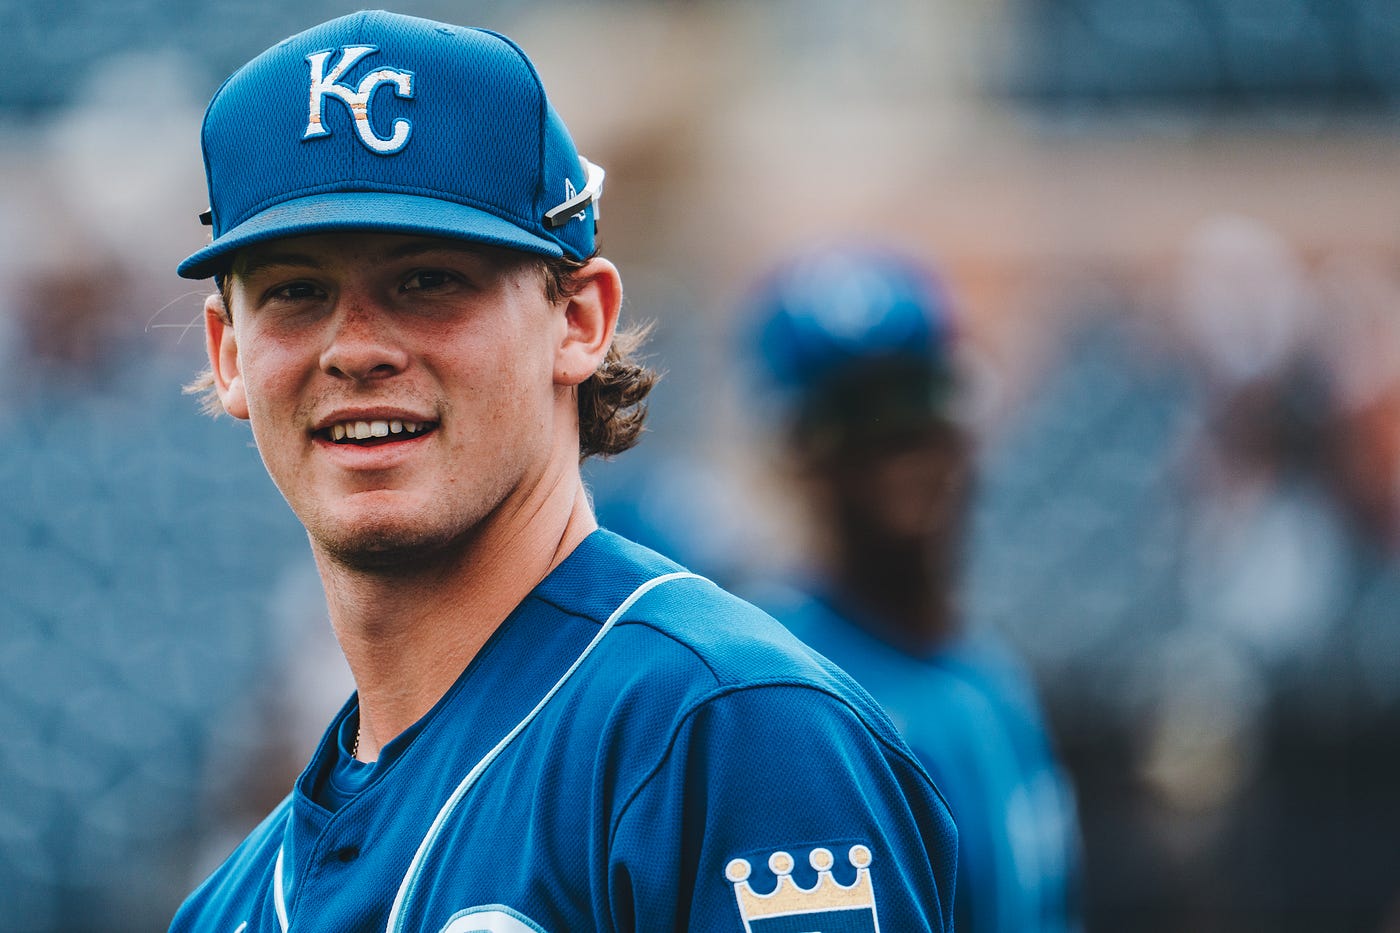 Royals Announce Minor League Players, Pitchers of the Year